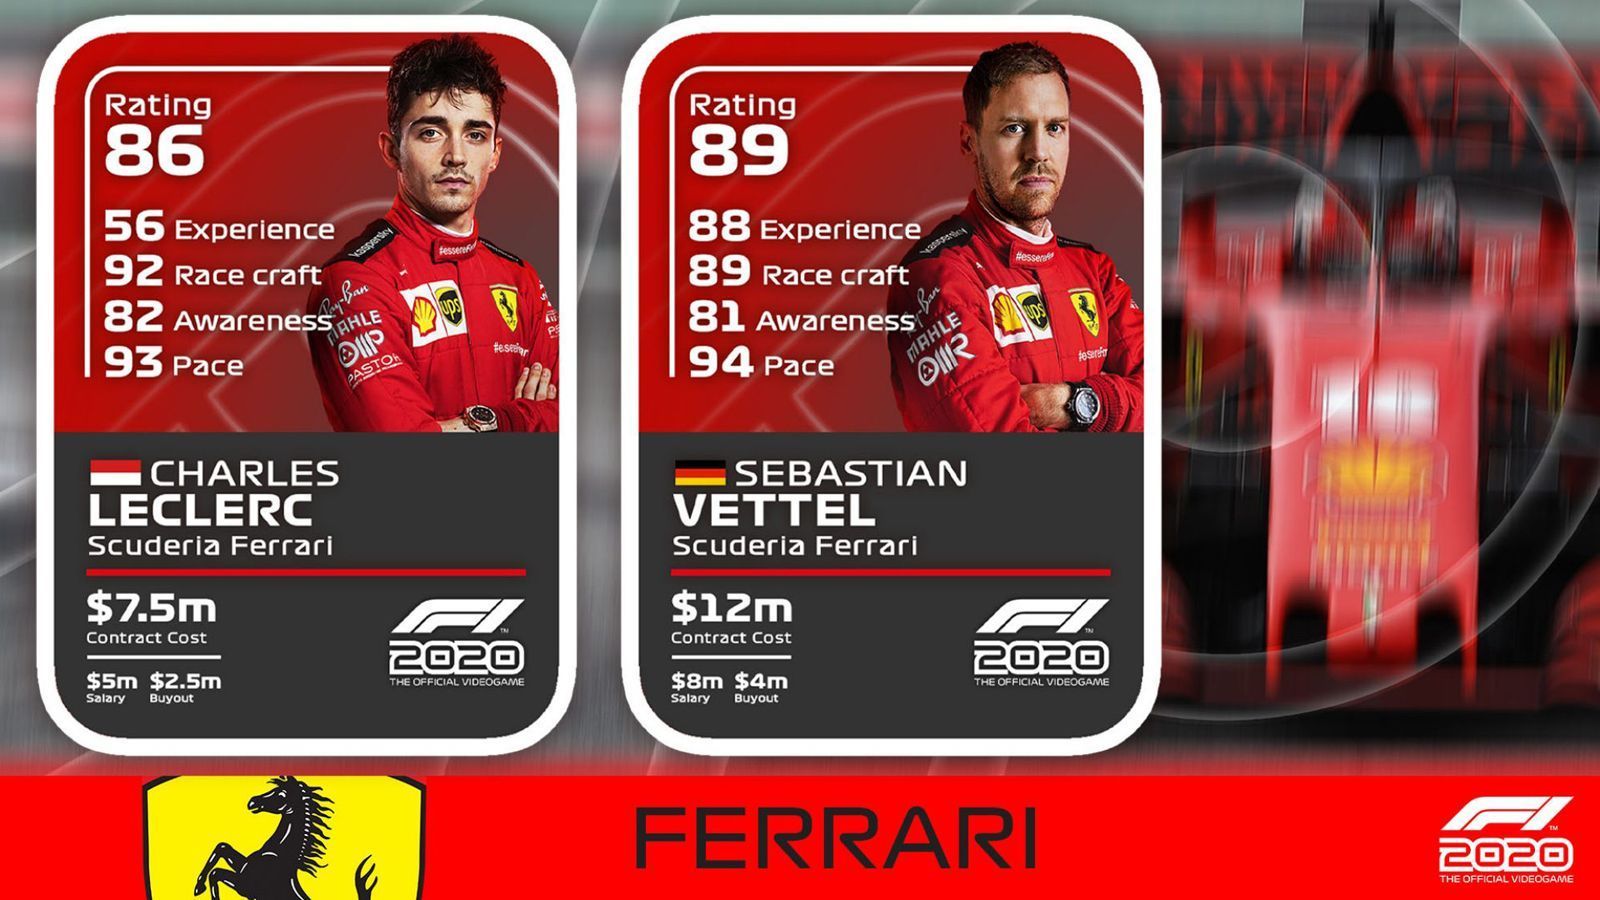 
                <strong>Ferrari</strong><br>
                Charles Leclerc: Erfahrung 56, Fahrkunst 92, Bewusstsein 82, Pace 93, Overall Rating 86Sebastian Vettel: Erfahrung 88, Fahrkunst 89, Bewusstsein 81, Pace 94, Overall Rating 89
              